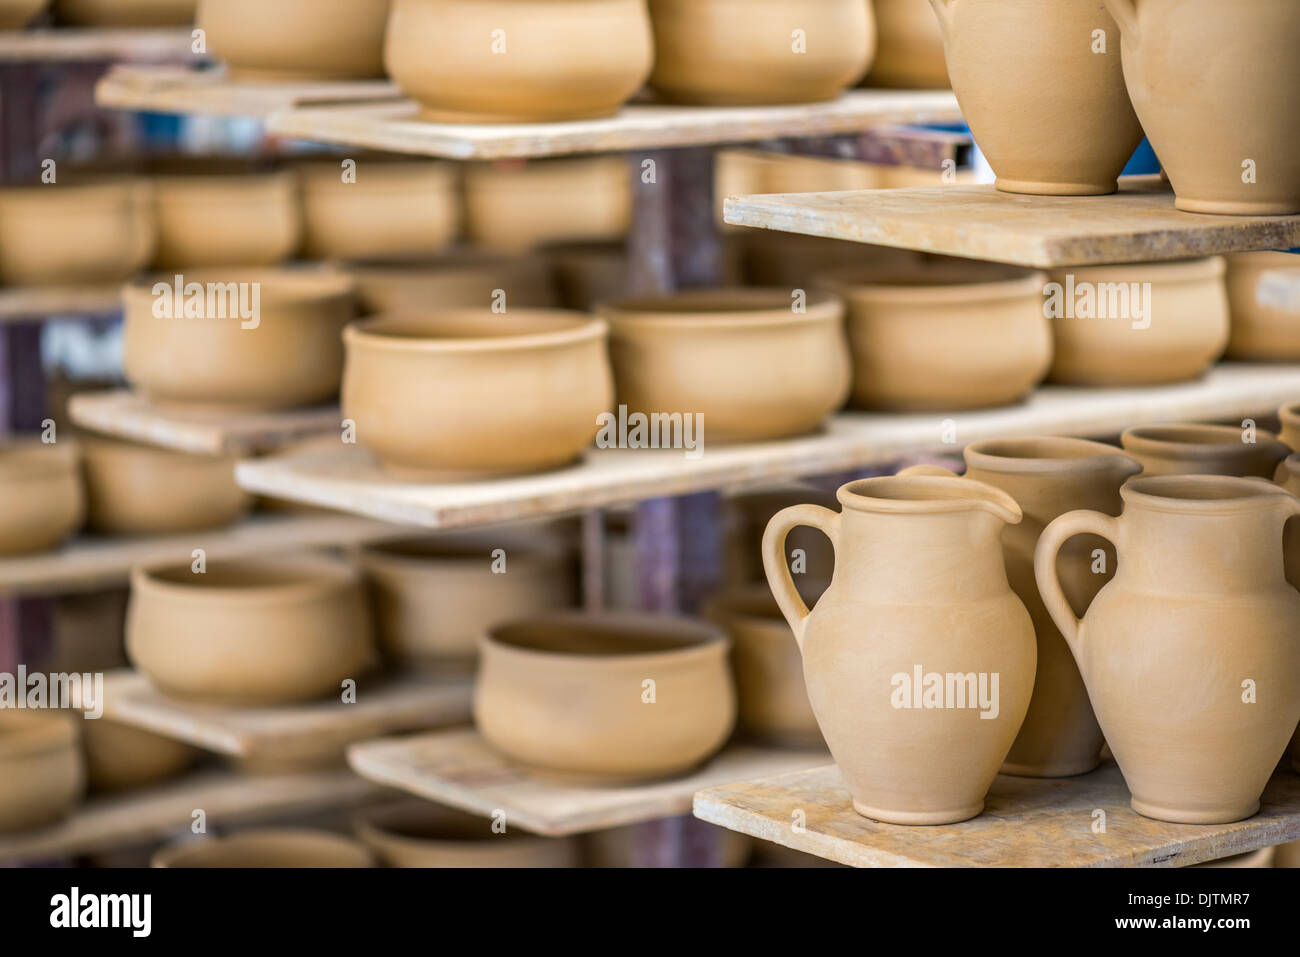 Shelves with ceramic dishware in pottery workshop Stock Photo